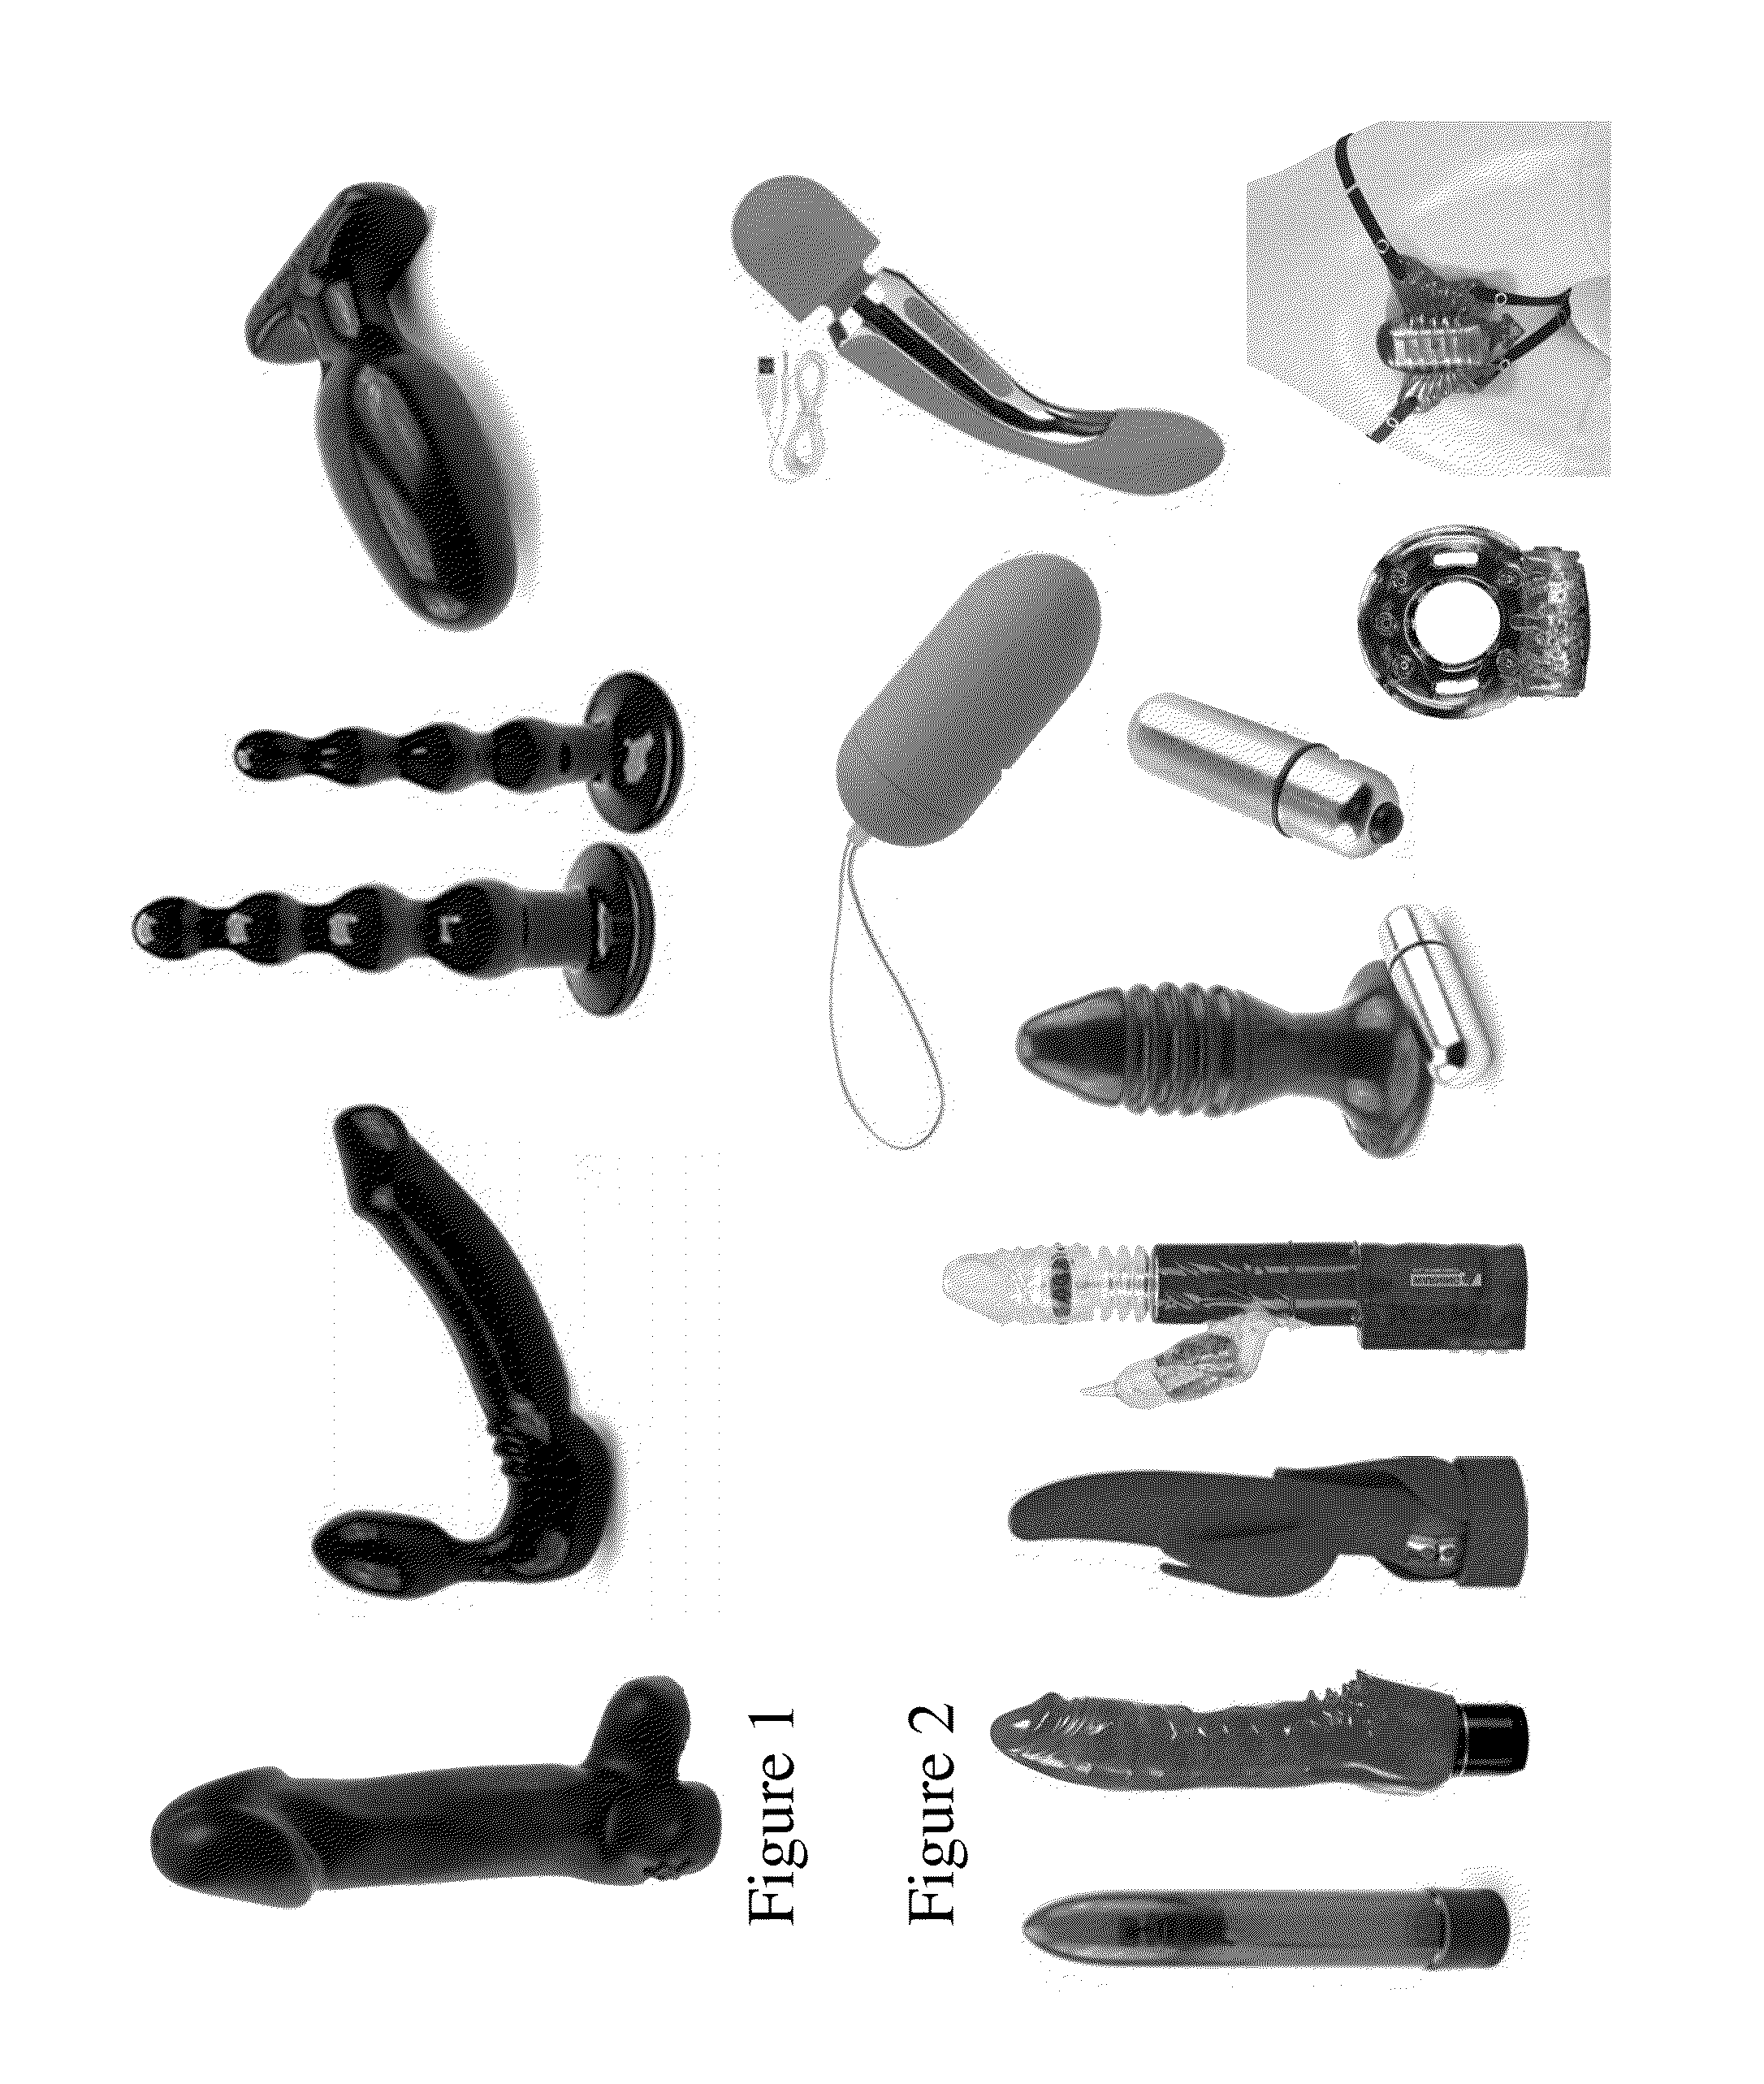 Methods and devices relating to molded adult devices